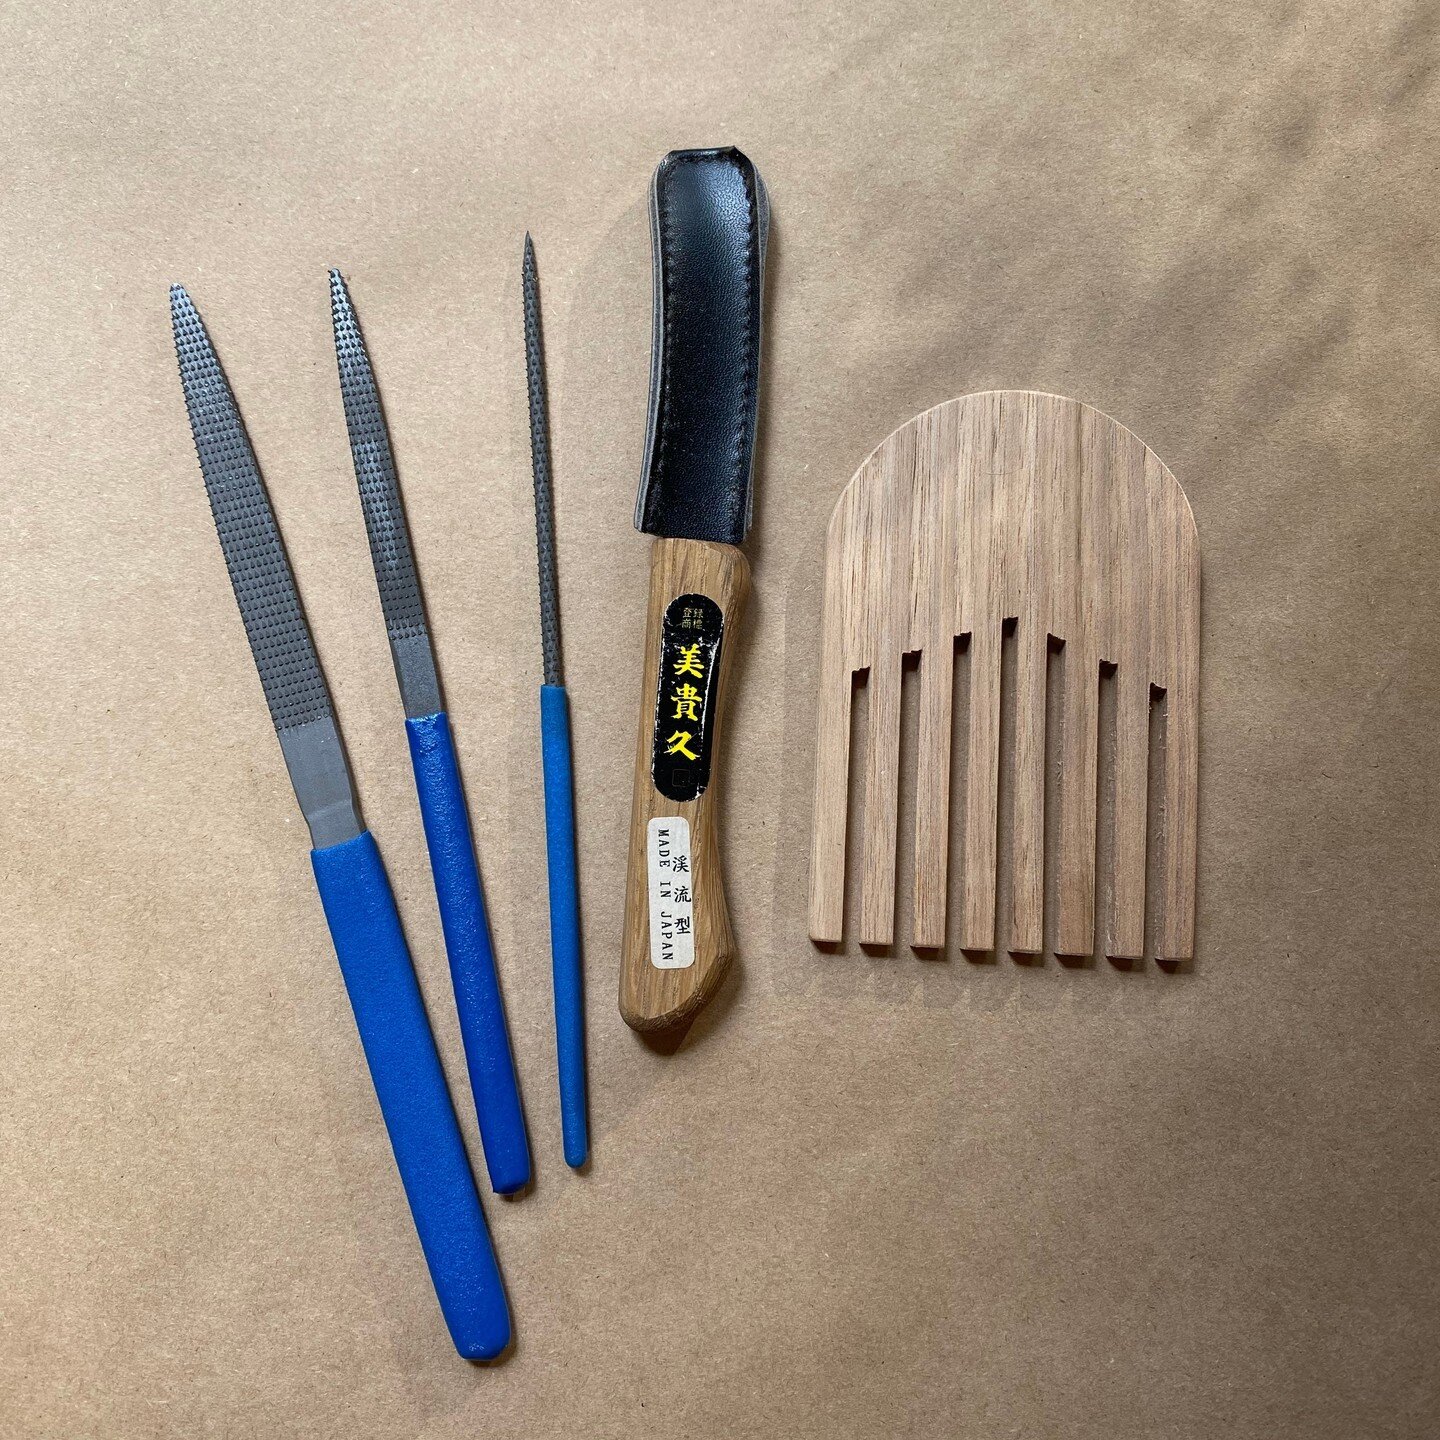 Mel's Carving Club members, are you ready for our next project - the Arch Comb? 😆 MCC boxes ship out around 10th of each month! 😘 so last day to add tools to your order is Wednesday, 9/7! ⁠
⁠
Complete your tools now, purchase them at melanieabrante